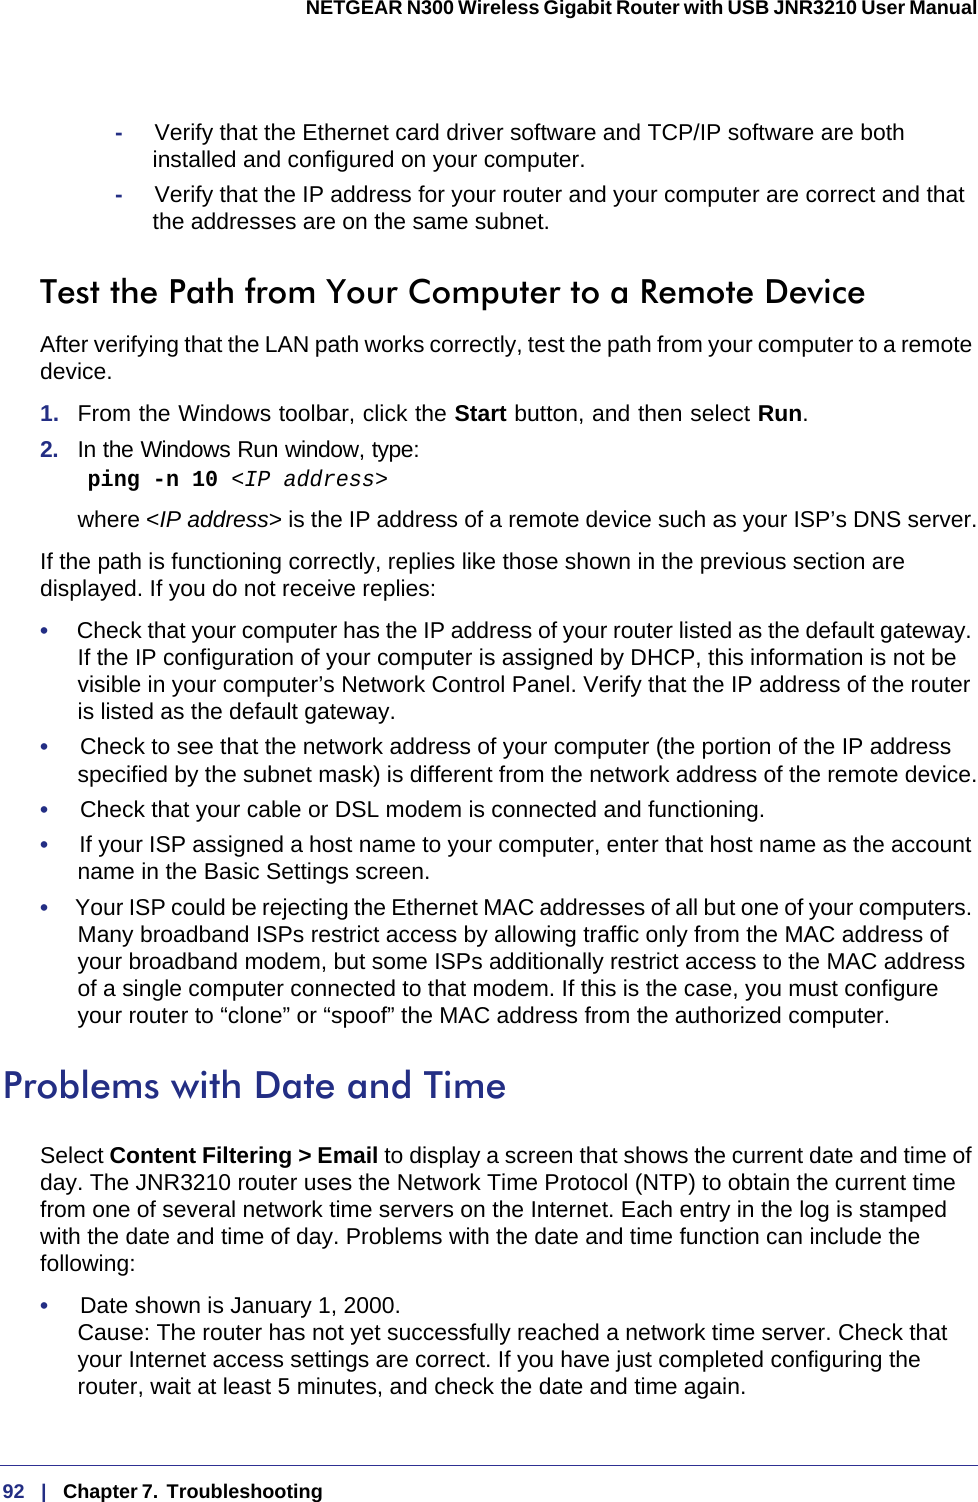 92   |   Chapter 7.  Troubleshooting  NETGEAR N300 Wireless Gigabit Router with USB JNR3210 User Manual -     Verify that the Ethernet card driver software and TCP/IP software are both installed and configured on your computer.-     Verify that the IP address for your router and your computer are correct and that the addresses are on the same subnet.Test the Path from Your Computer to a Remote DeviceAfter verifying that the LAN path works correctly, test the path from your computer to a remote device. 1.  From the Windows toolbar, click the Start button, and then select Run.2.  In the Windows Run window, type:    ping -n 10 &lt;IP address&gt;where &lt;IP address&gt; is the IP address of a remote device such as your ISP’s DNS server.If the path is functioning correctly, replies like those shown in the previous section are displayed. If you do not receive replies:•     Check that your computer has the IP address of your router listed as the default gateway. If the IP configuration of your computer is assigned by DHCP, this information is not be visible in your computer’s Network Control Panel. Verify that the IP address of the router is listed as the default gateway.•     Check to see that the network address of your computer (the portion of the IP address specified by the subnet mask) is different from the network address of the remote device.•     Check that your cable or DSL modem is connected and functioning.•     If your ISP assigned a host name to your computer, enter that host name as the account name in the Basic Settings screen.•     Your ISP could be rejecting the Ethernet MAC addresses of all but one of your computers. Many broadband ISPs restrict access by allowing traffic only from the MAC address of your broadband modem, but some ISPs additionally restrict access to the MAC address of a single computer connected to that modem. If this is the case, you must configure your router to “clone” or “spoof” the MAC address from the authorized computer. Problems with Date and TimeSelect Content Filtering &gt; Email to display a screen that shows the current date and time of day. The JNR3210 router uses the Network Time Protocol (NTP) to obtain the current time from one of several network time servers on the Internet. Each entry in the log is stamped with the date and time of day. Problems with the date and time function can include the following:•     Date shown is January 1, 2000. Cause: The router has not yet successfully reached a network time server. Check that your Internet access settings are correct. If you have just completed configuring the router, wait at least 5 minutes, and check the date and time again.